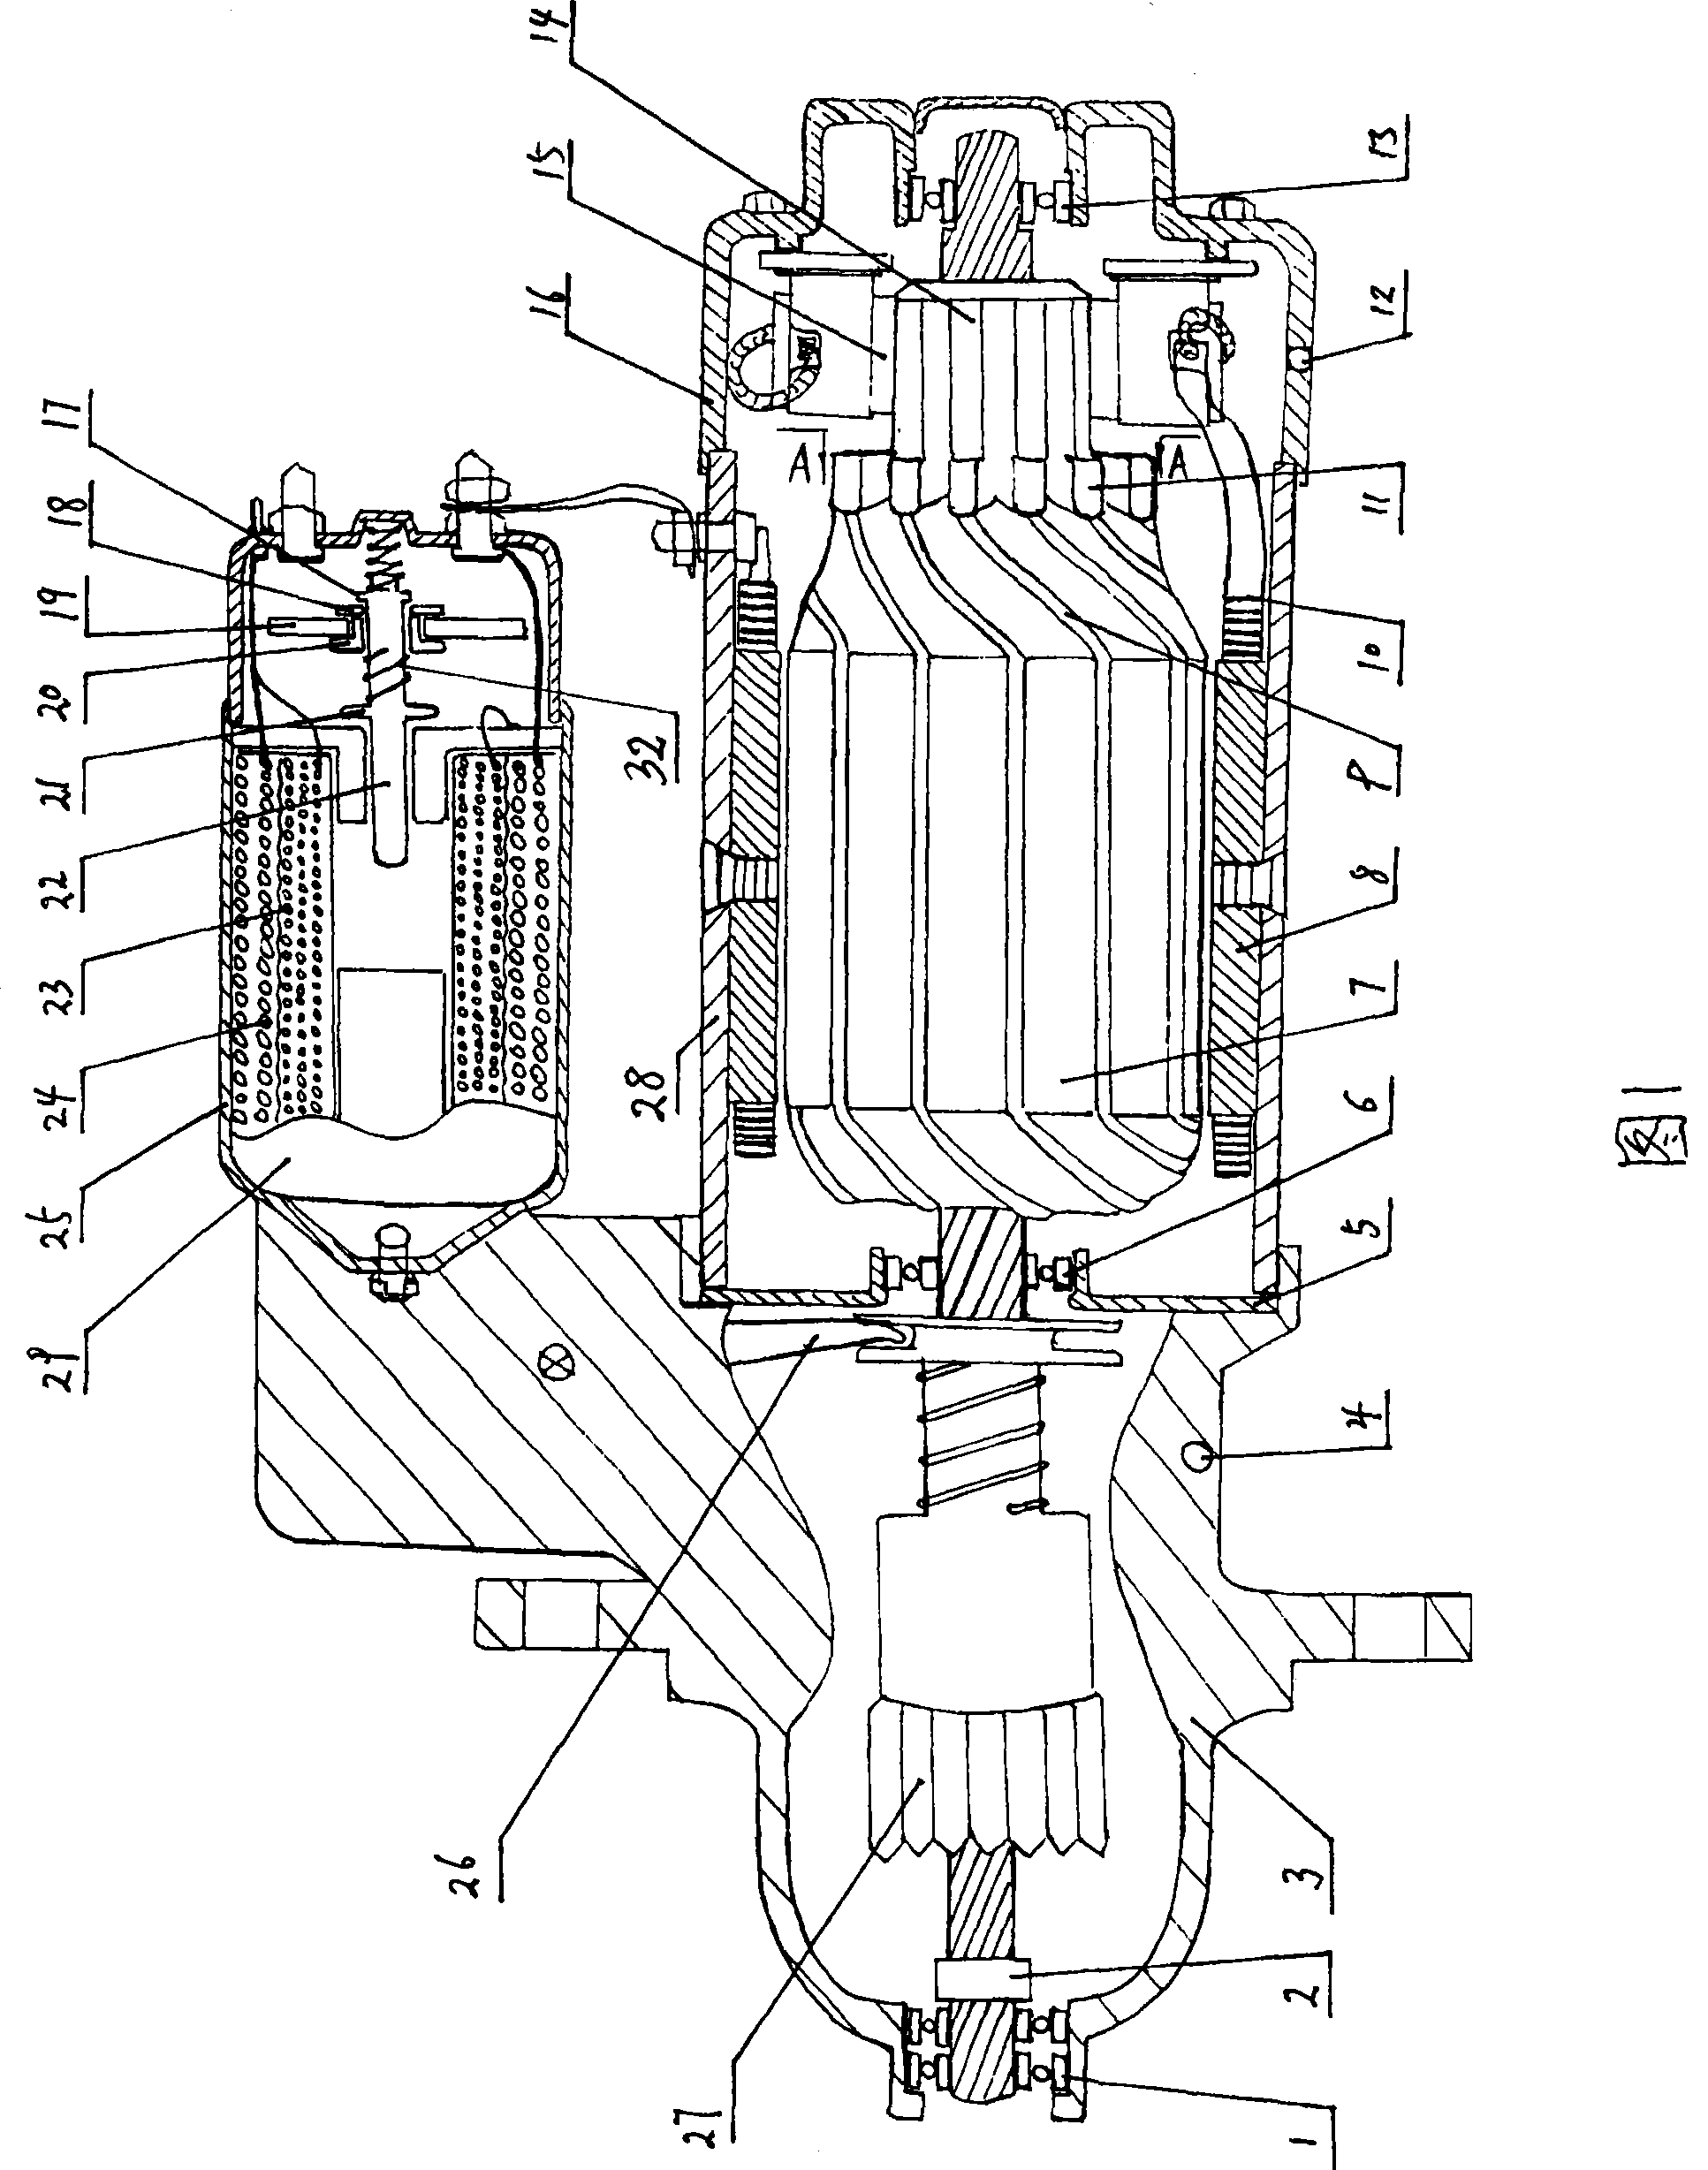 Composite electromagnetic material engine